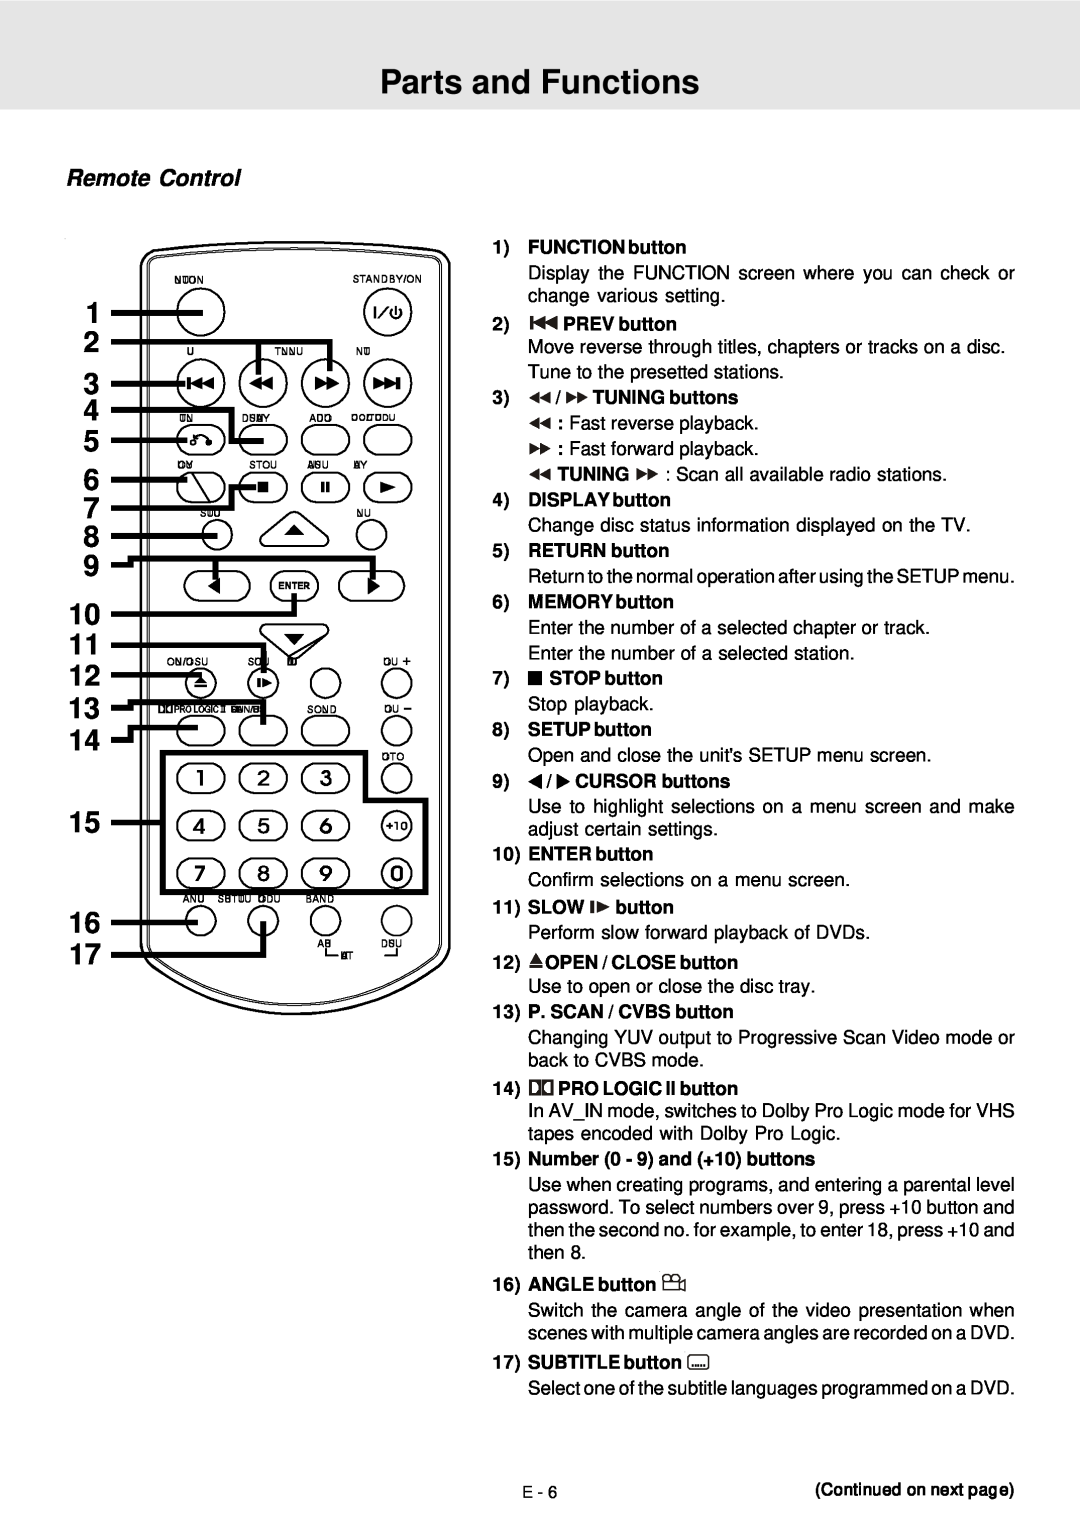 Venturer STS91 manual Parts and Functions, Remote Control 